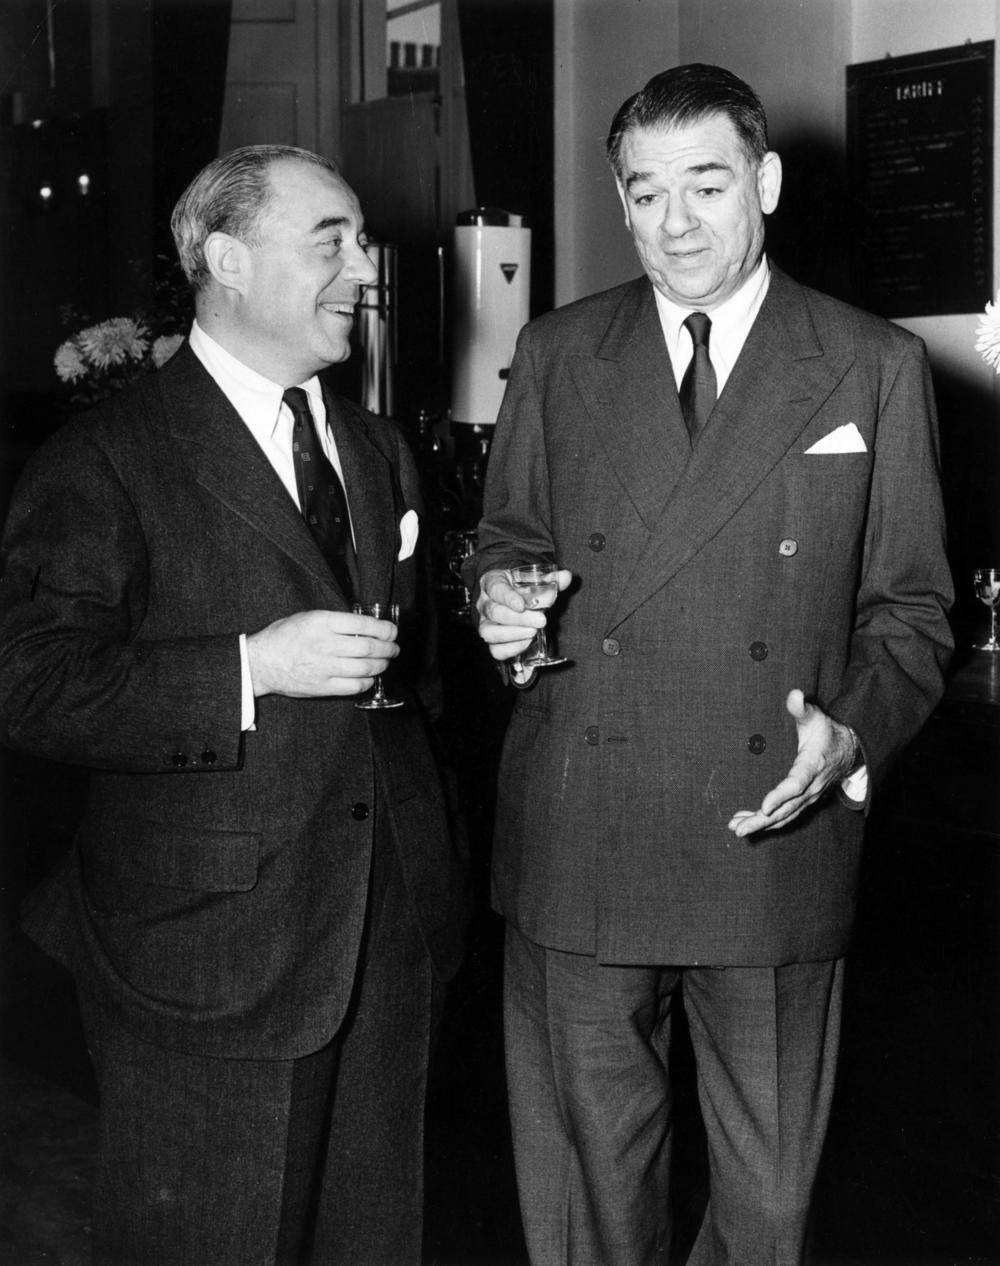 Composer Richard Rodgers and lyricist-librettist Oscar Hammerstein in London in October 1951, before a performance of <em>South Pacific</em>.